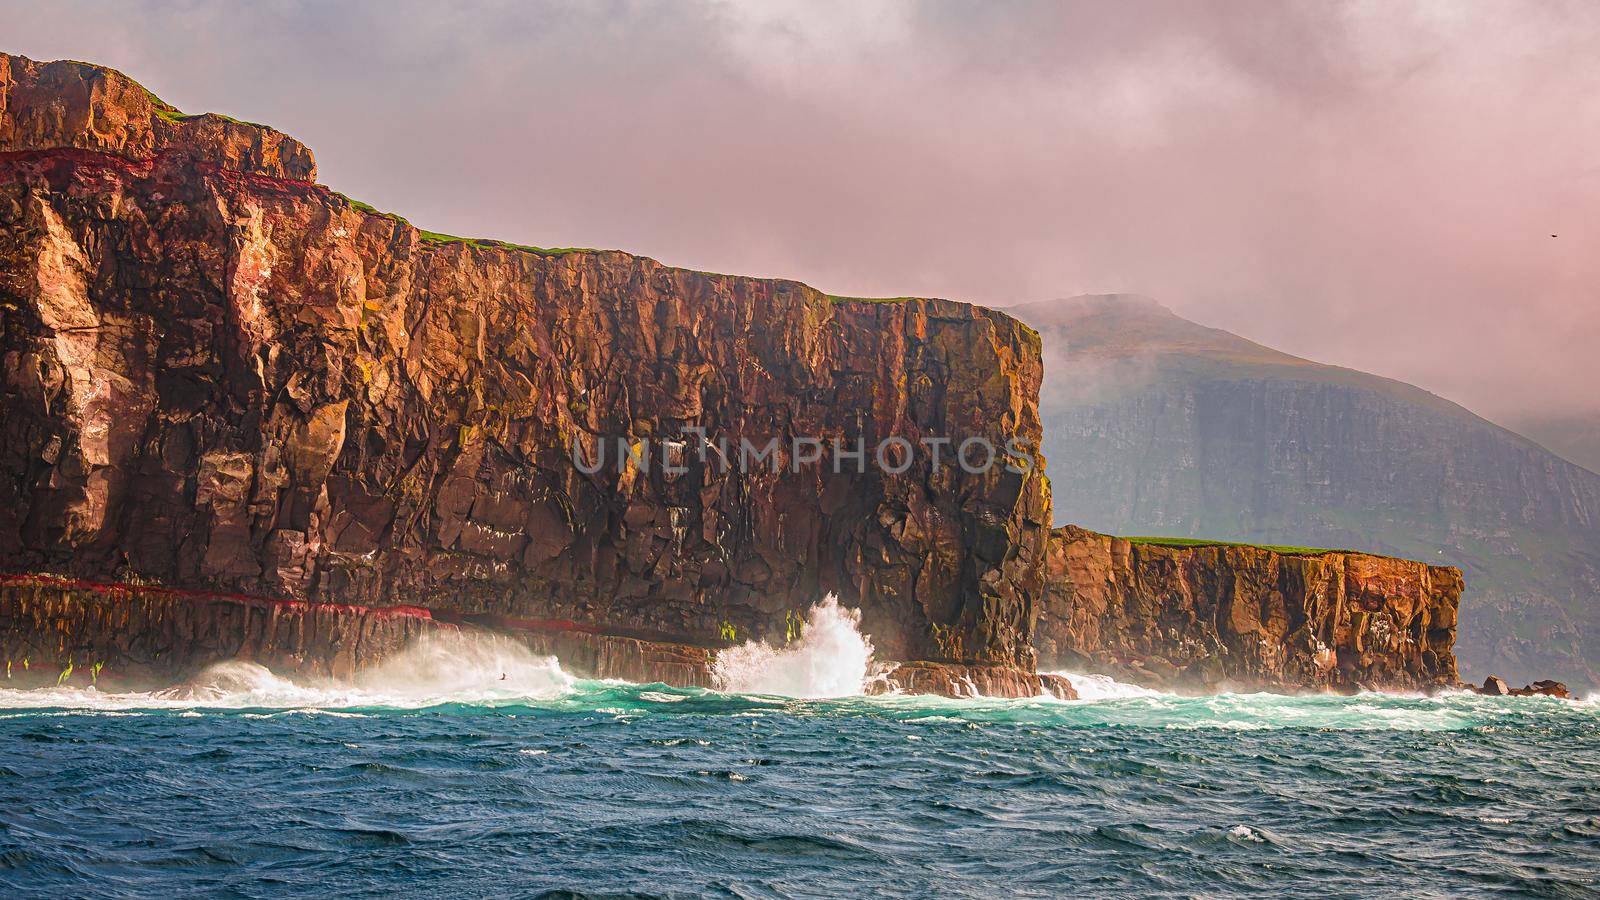 Mythical Faroe Islands in the middle of Atlantic Ocean